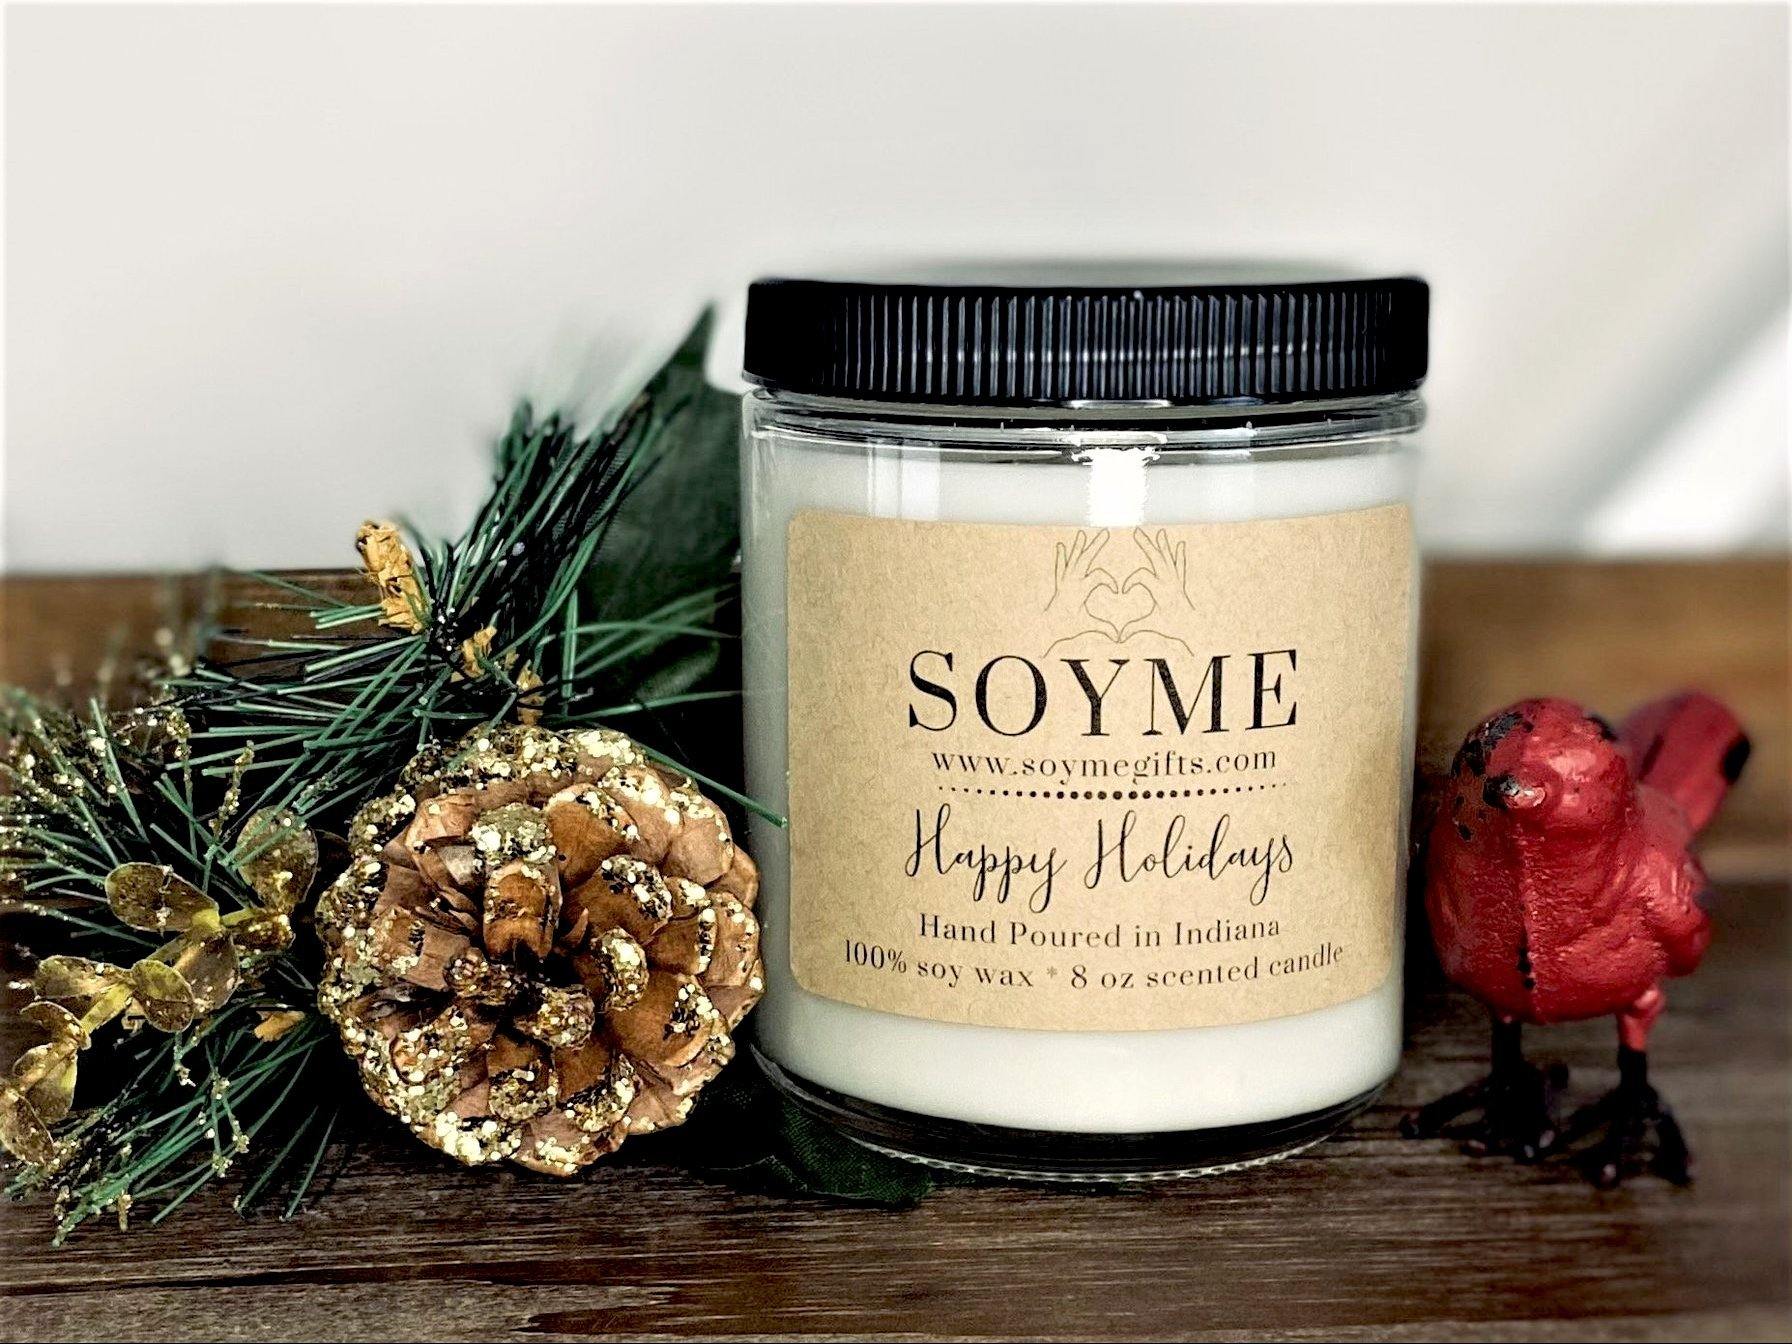 Happy Holidays - Soyme Gifts